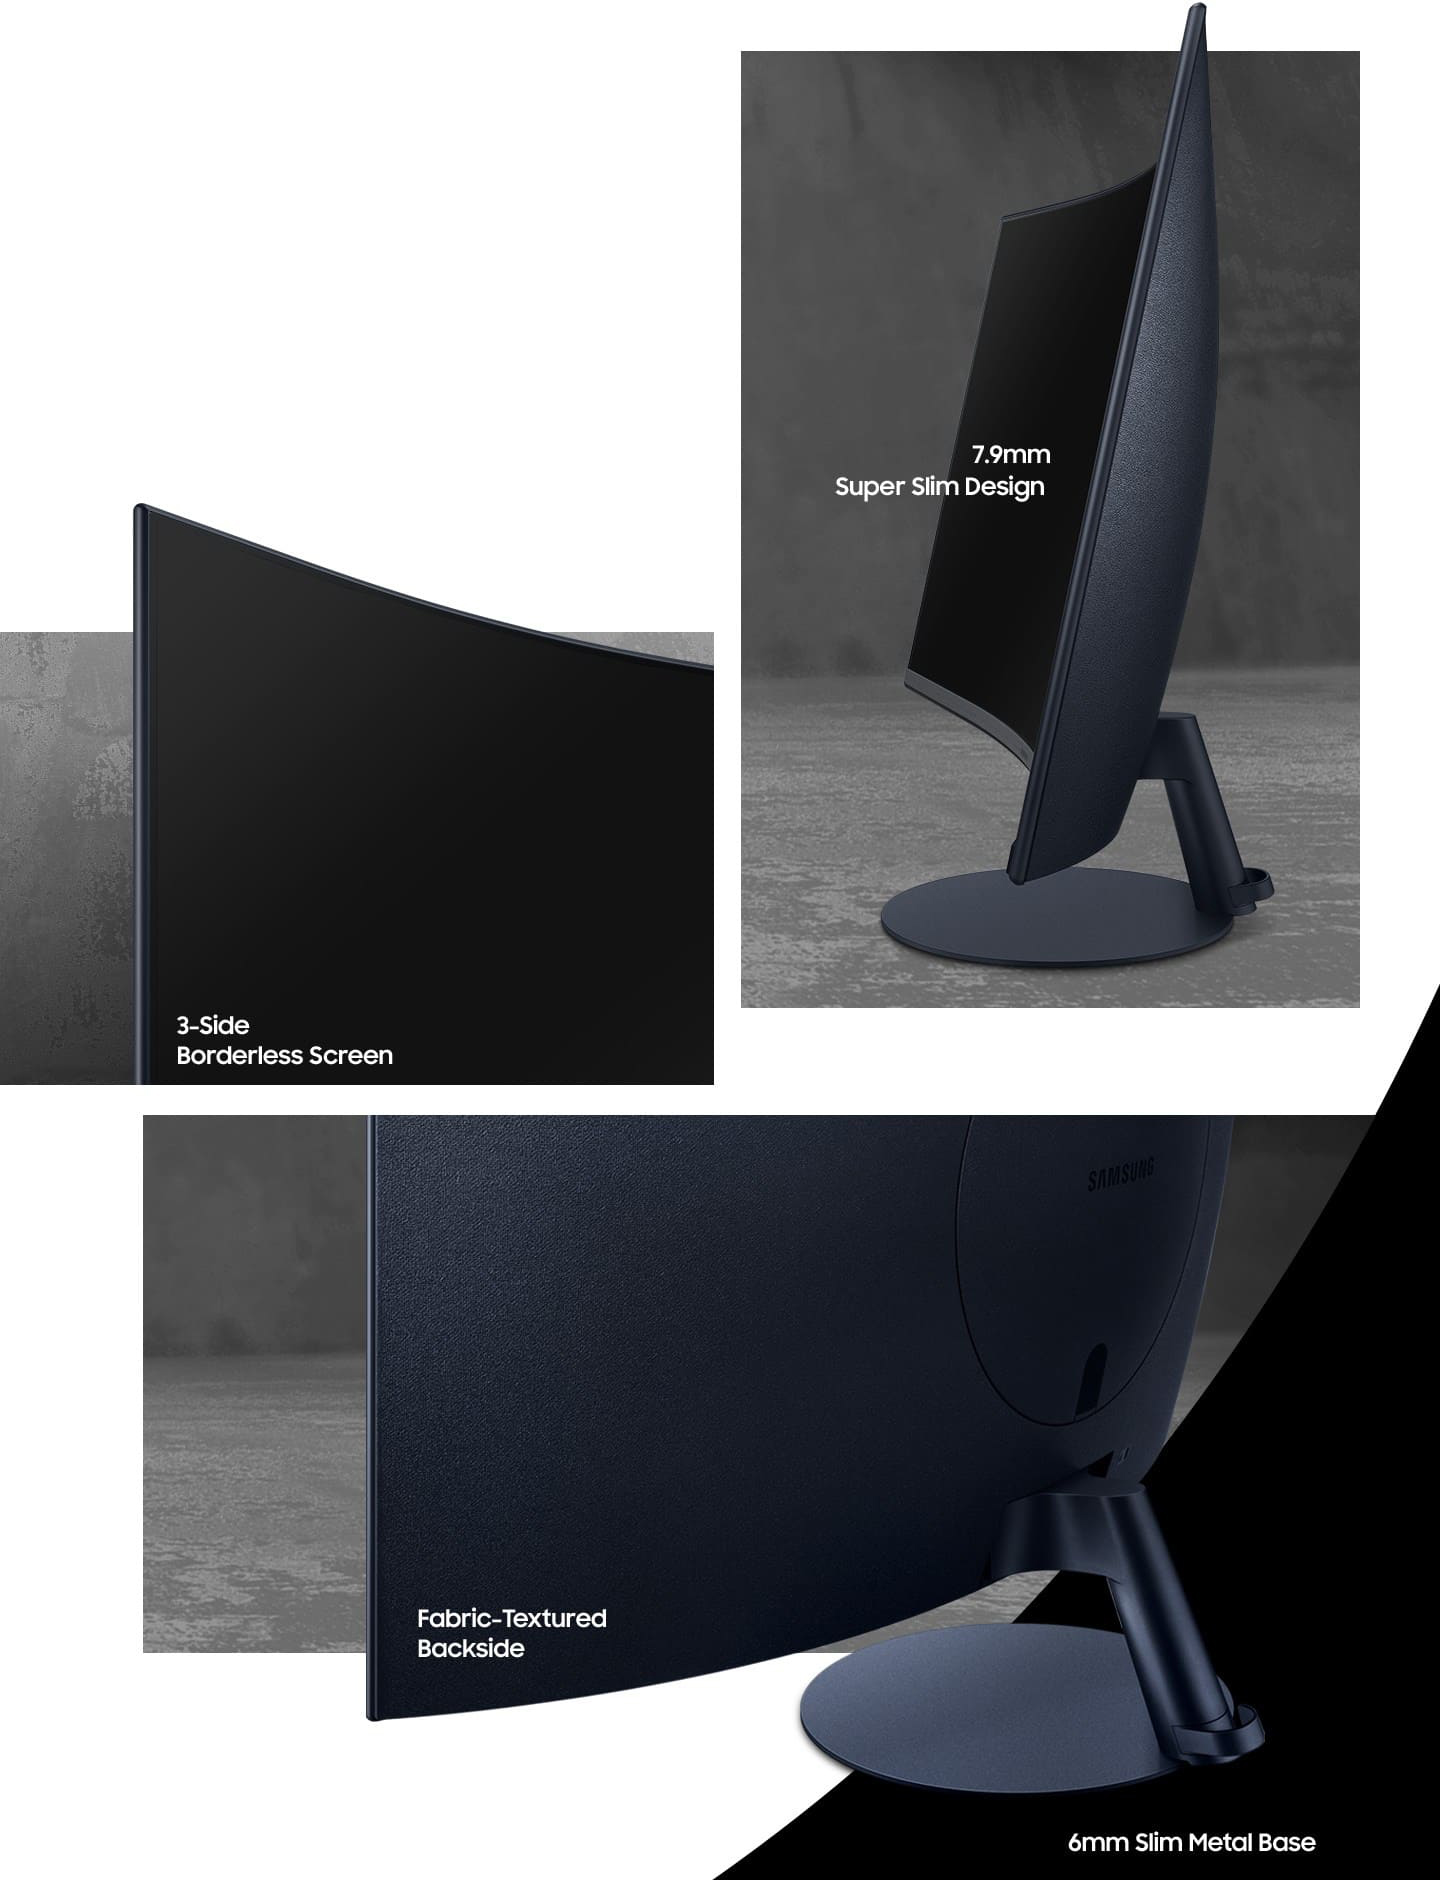 Samsung T55 Curved Monitor Features